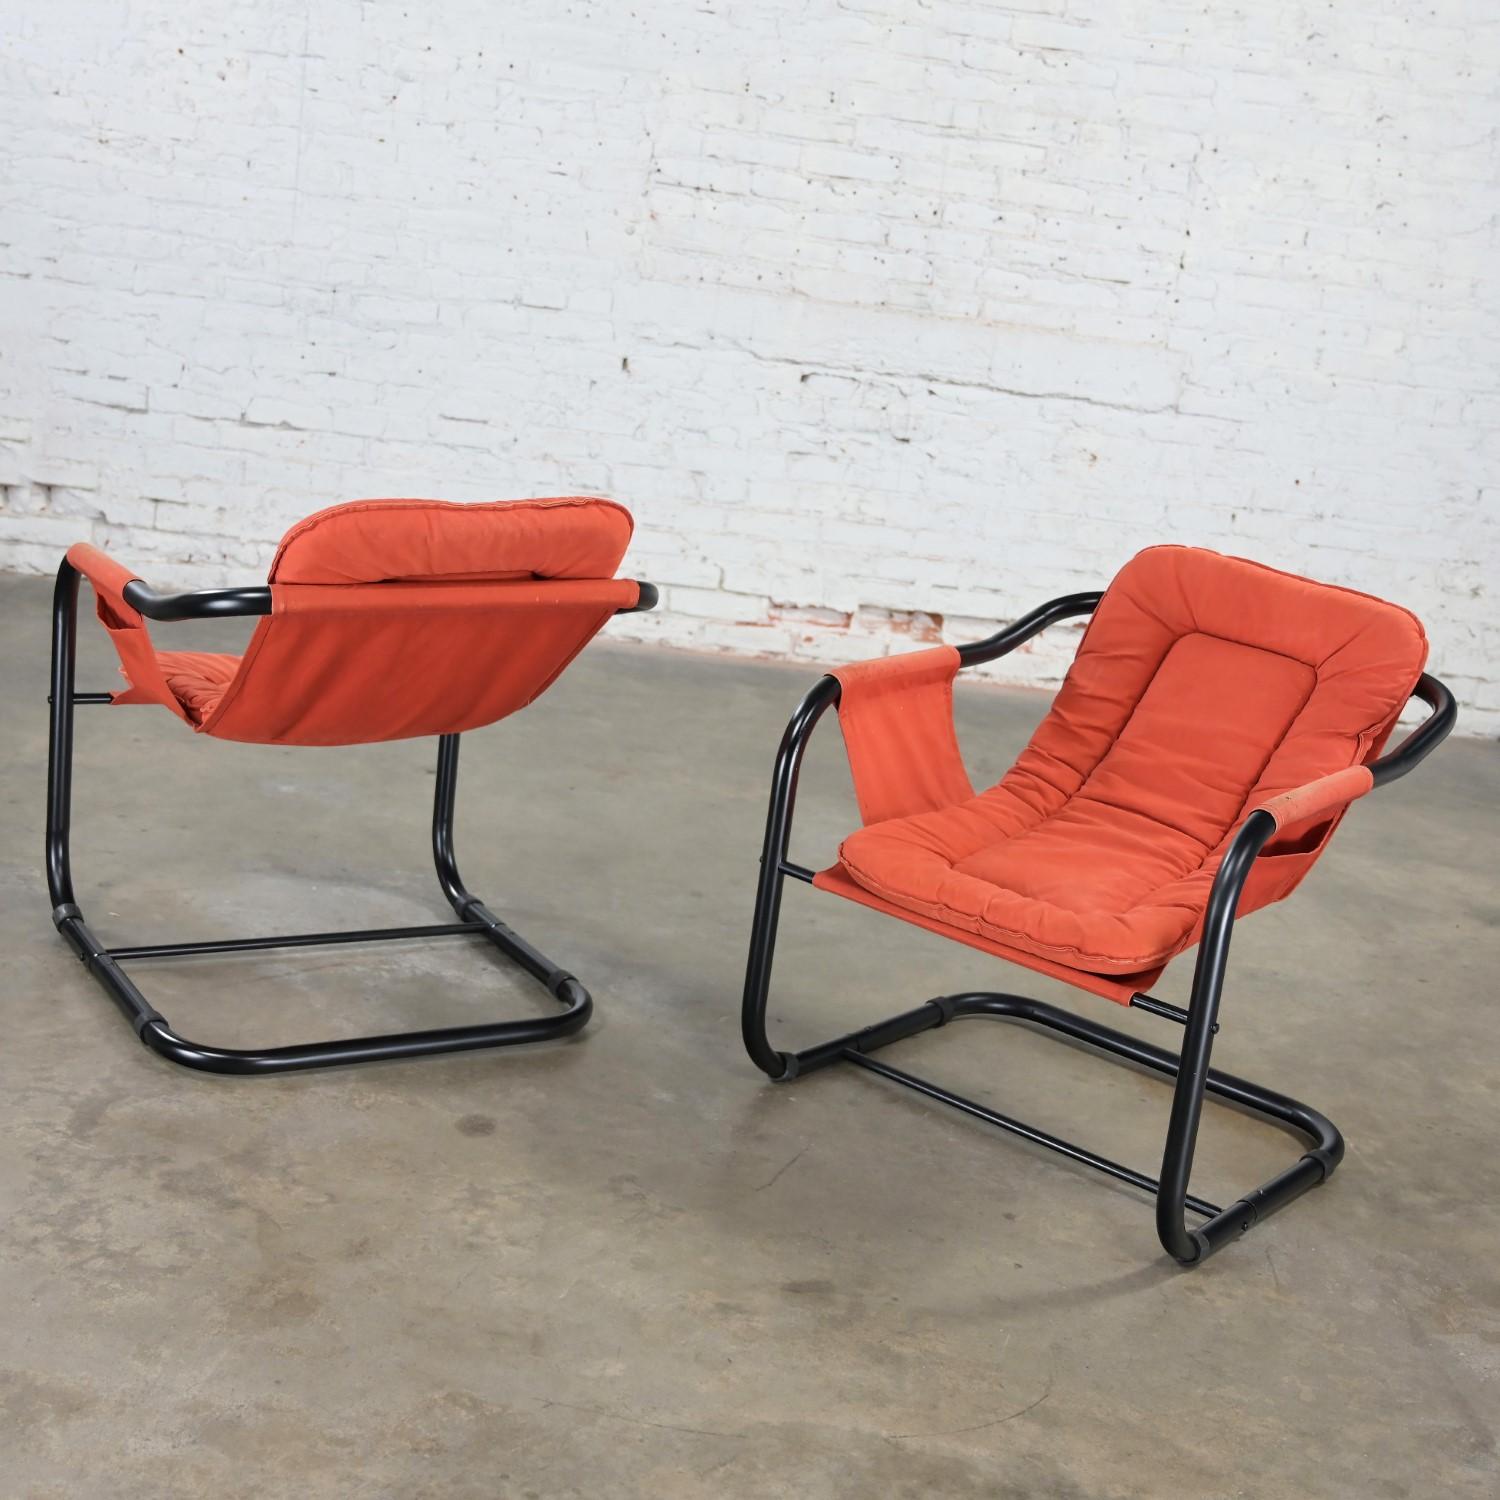 1970’s Modern Orange & Black Tube Cantilever Sling Lounge Chairs Jerry Johnson S For Sale 3